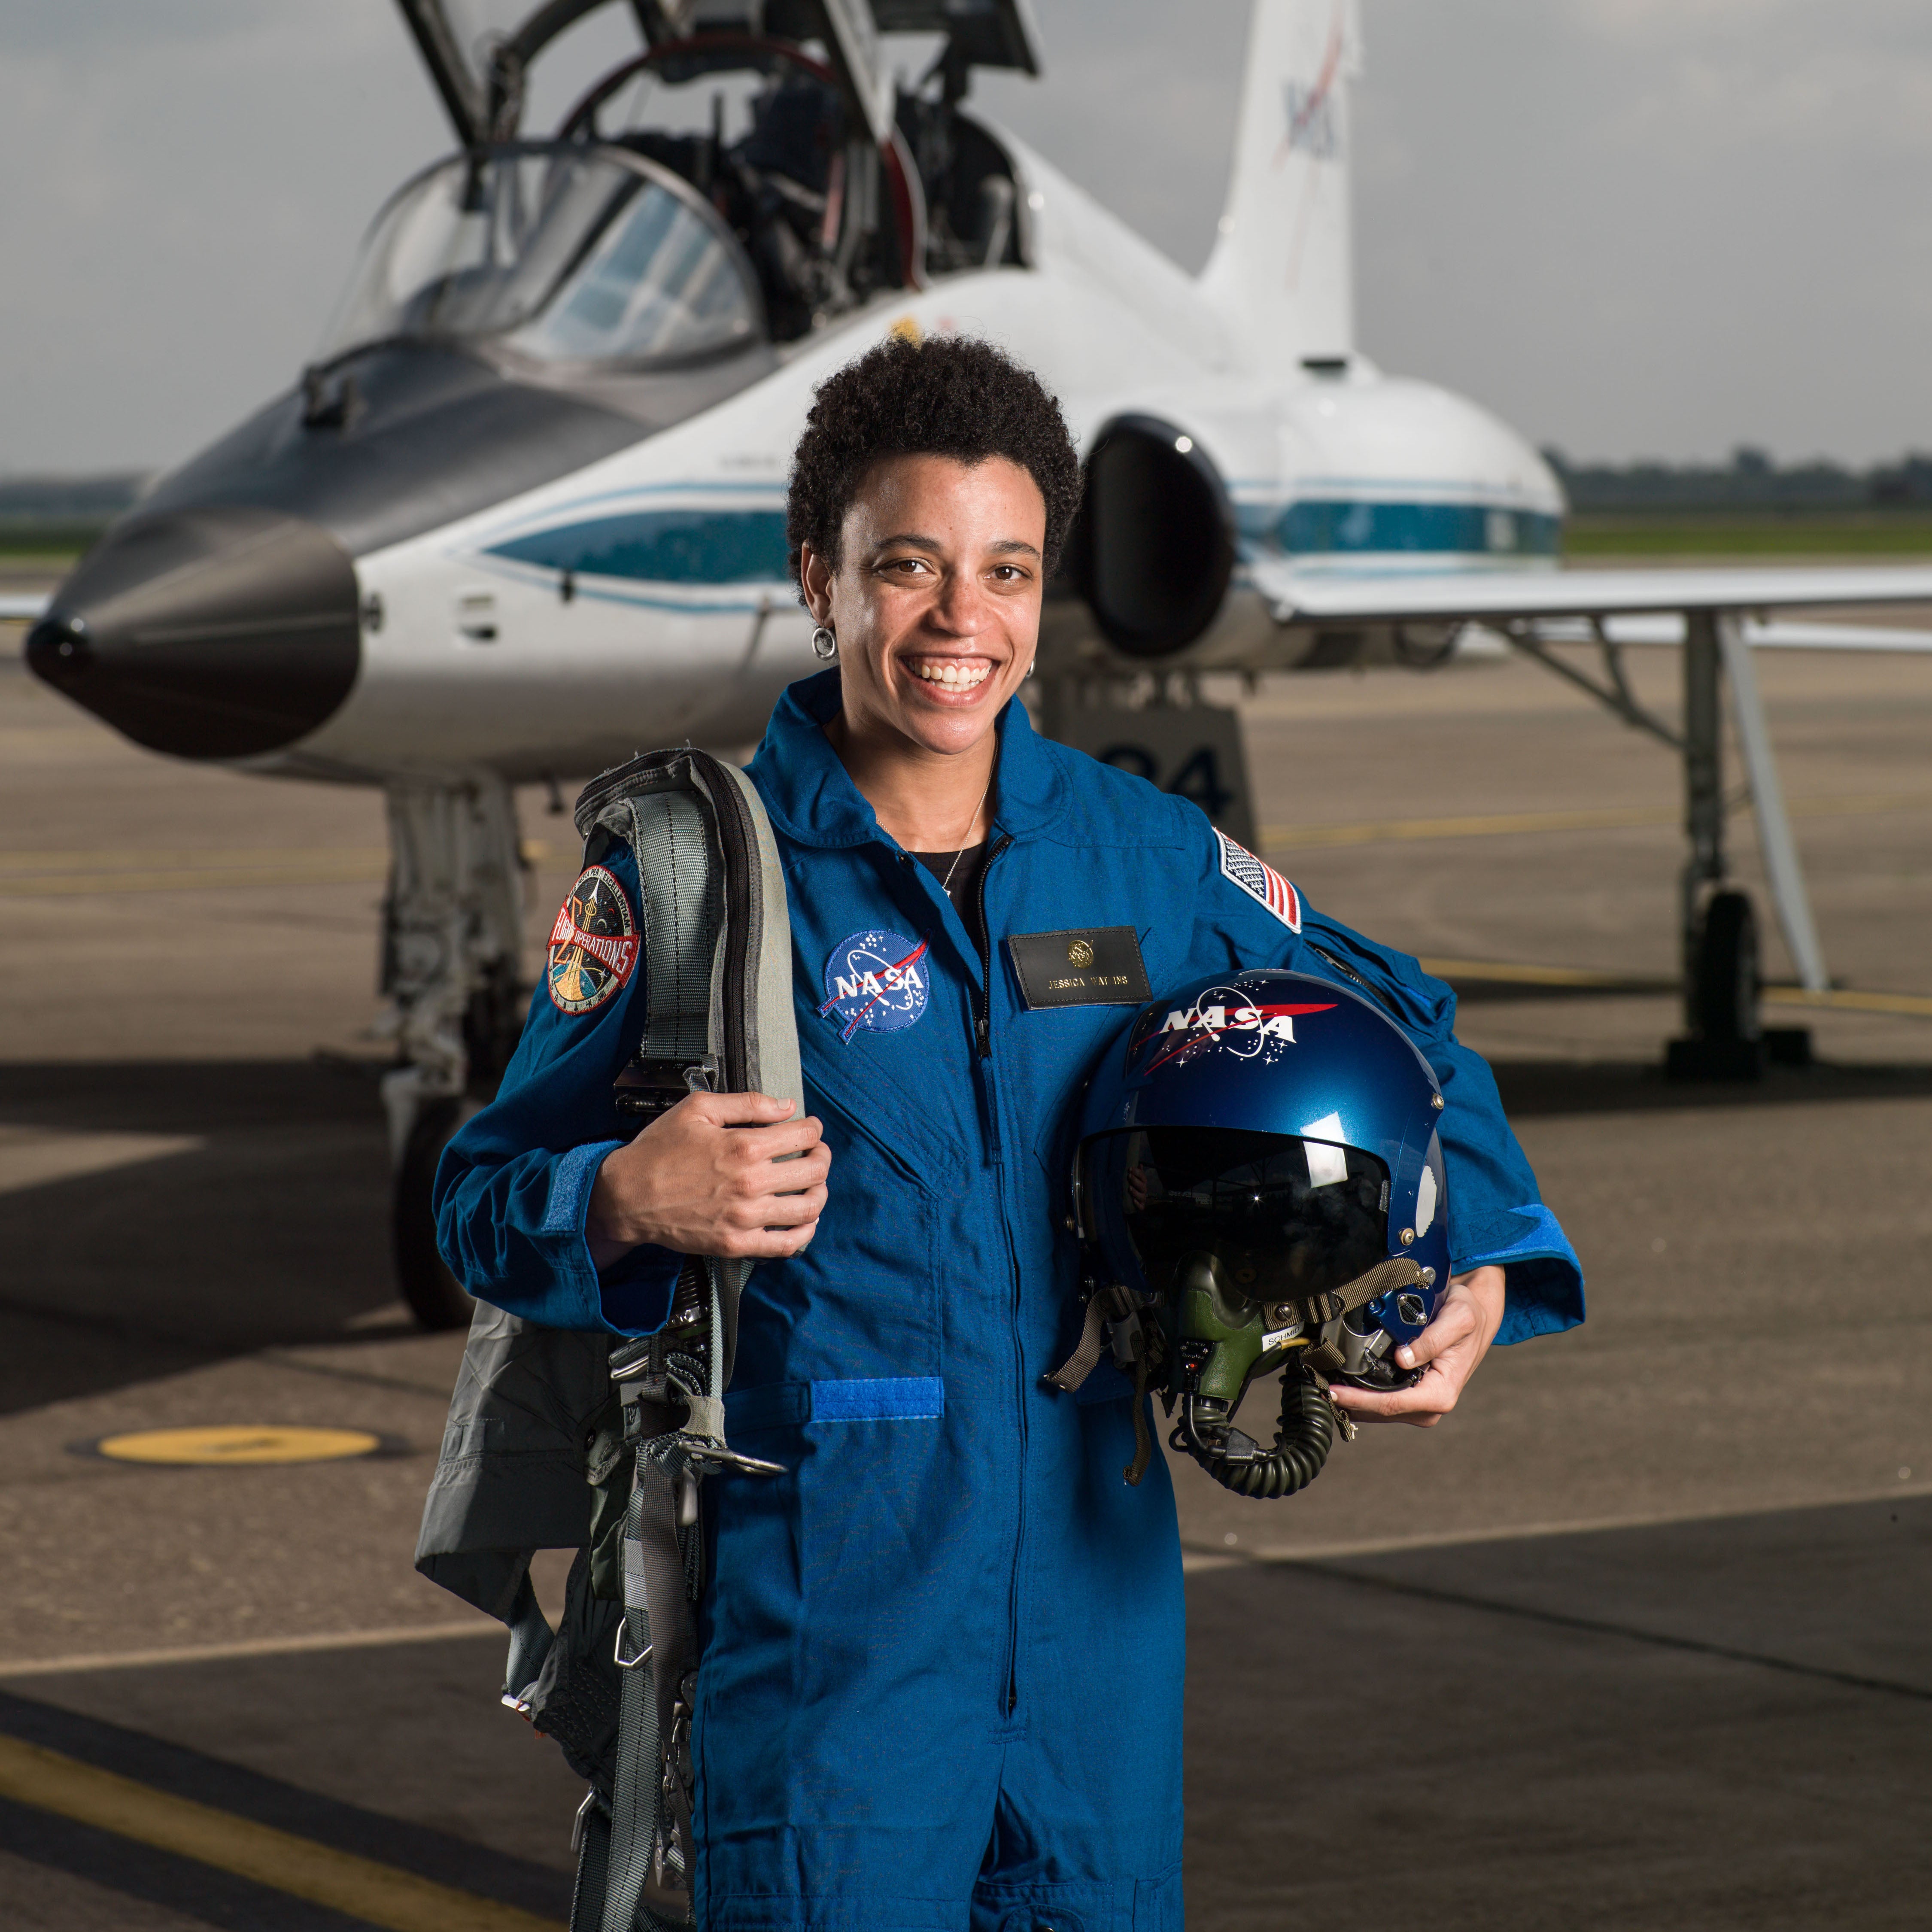 Out Of This World: NASA Accepts Black Scientist Jessica Watkins Into Its Astronaut Program
